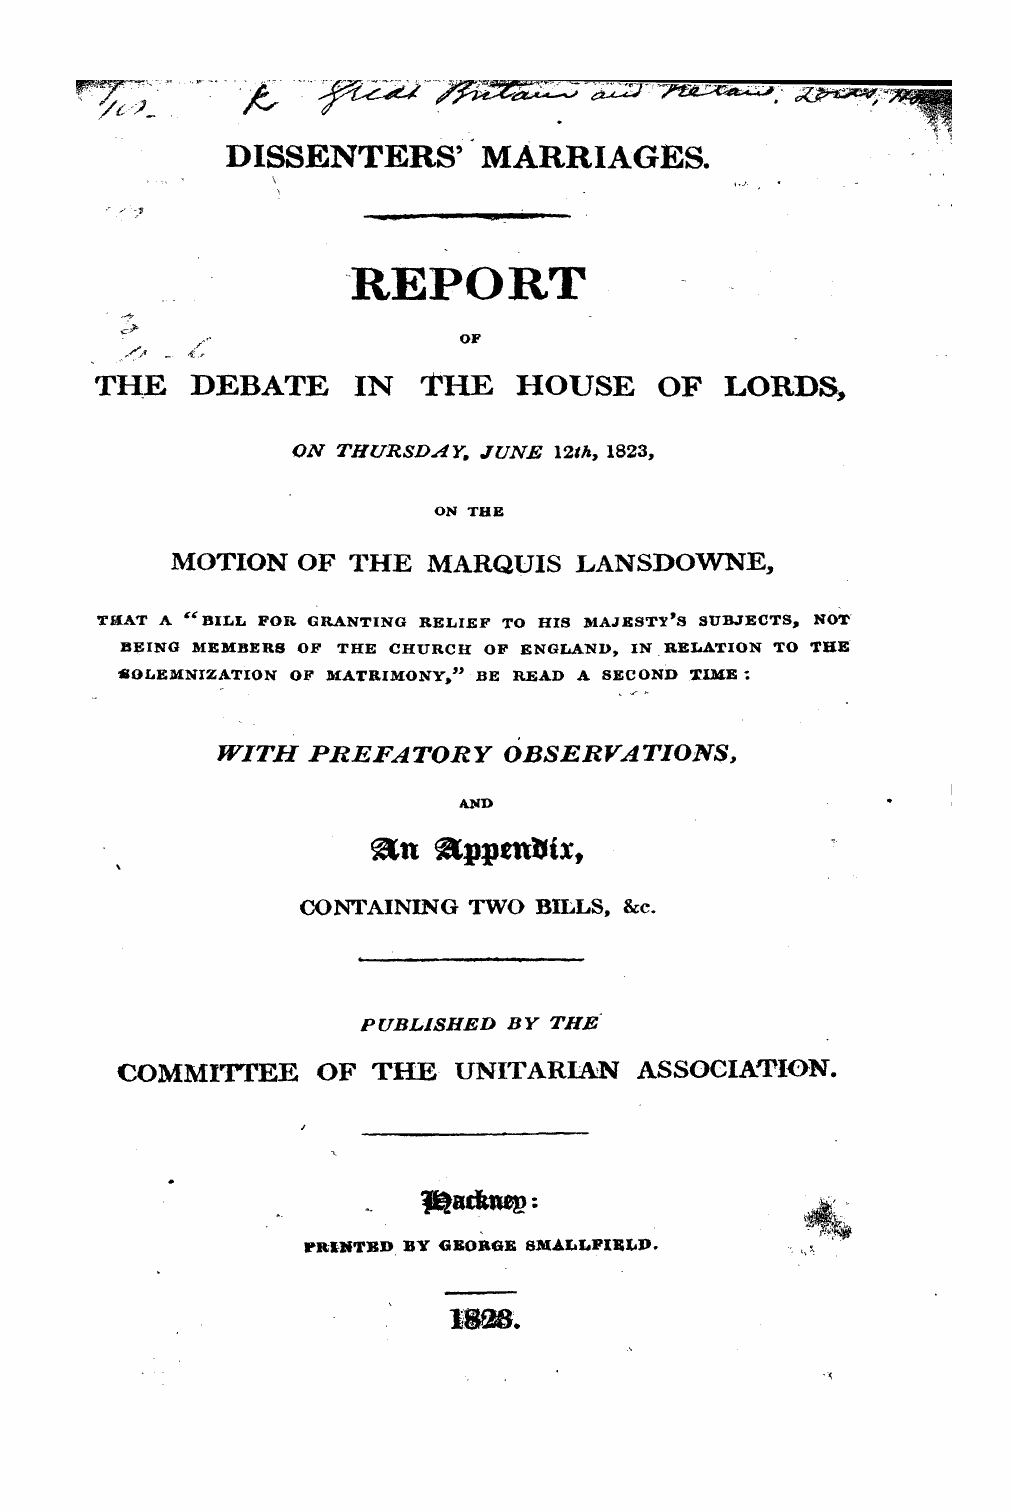 Monthly Repository (1806-1838) and Unitarian Chronicle (1832-1833): F Y, 1st edition, Supplement - Untitled Article